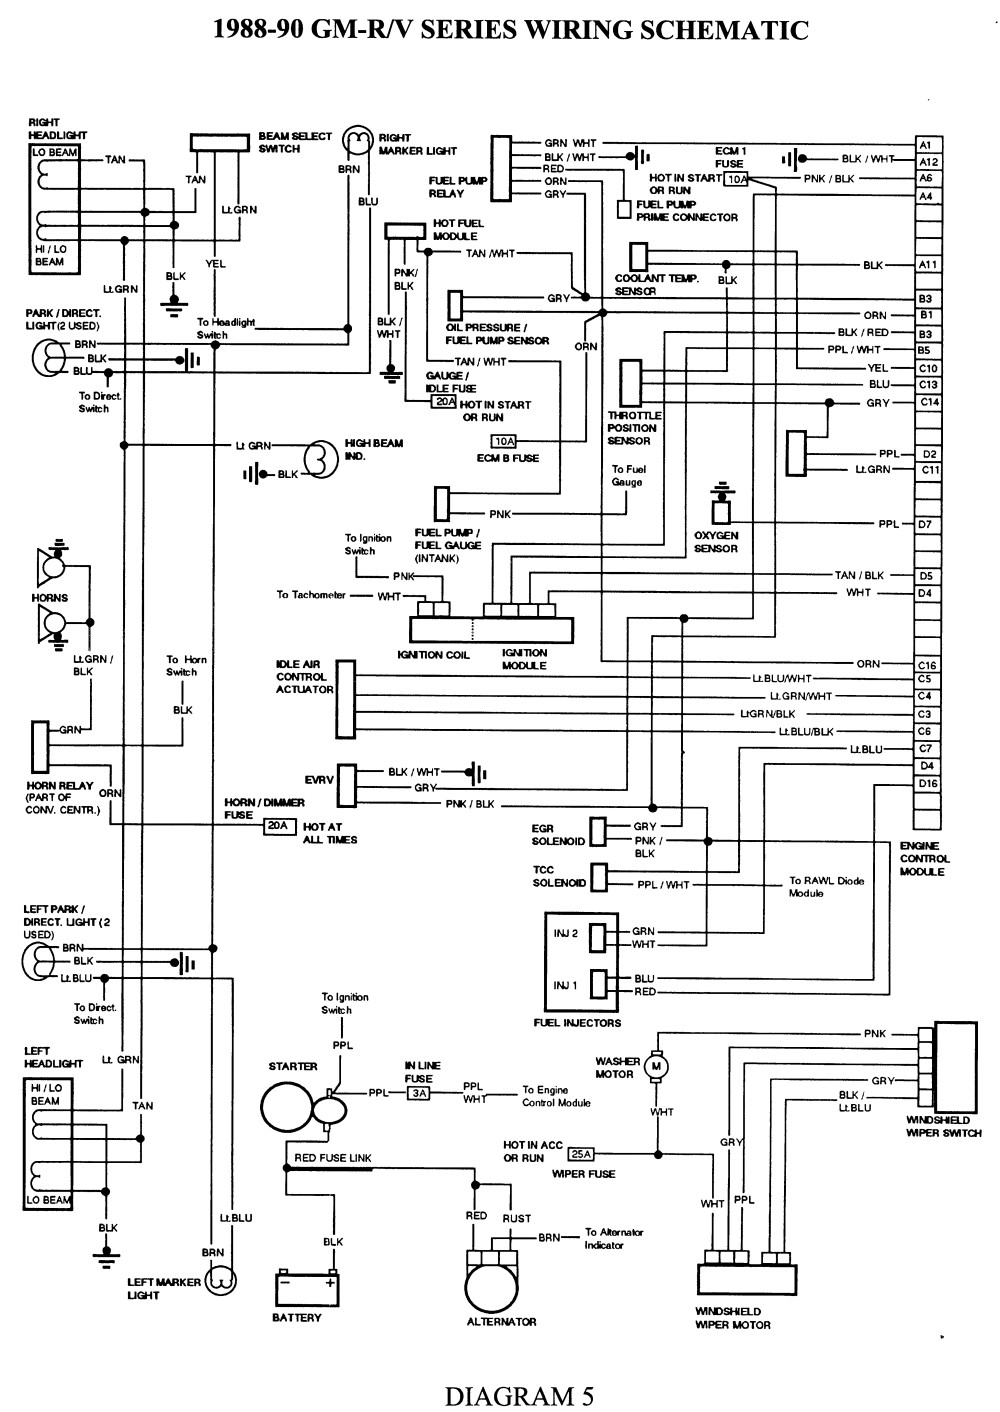 1990 chevy truck wiring diagram wiring diagram on P30 Chevy Frame for repair guides wiring diagrams